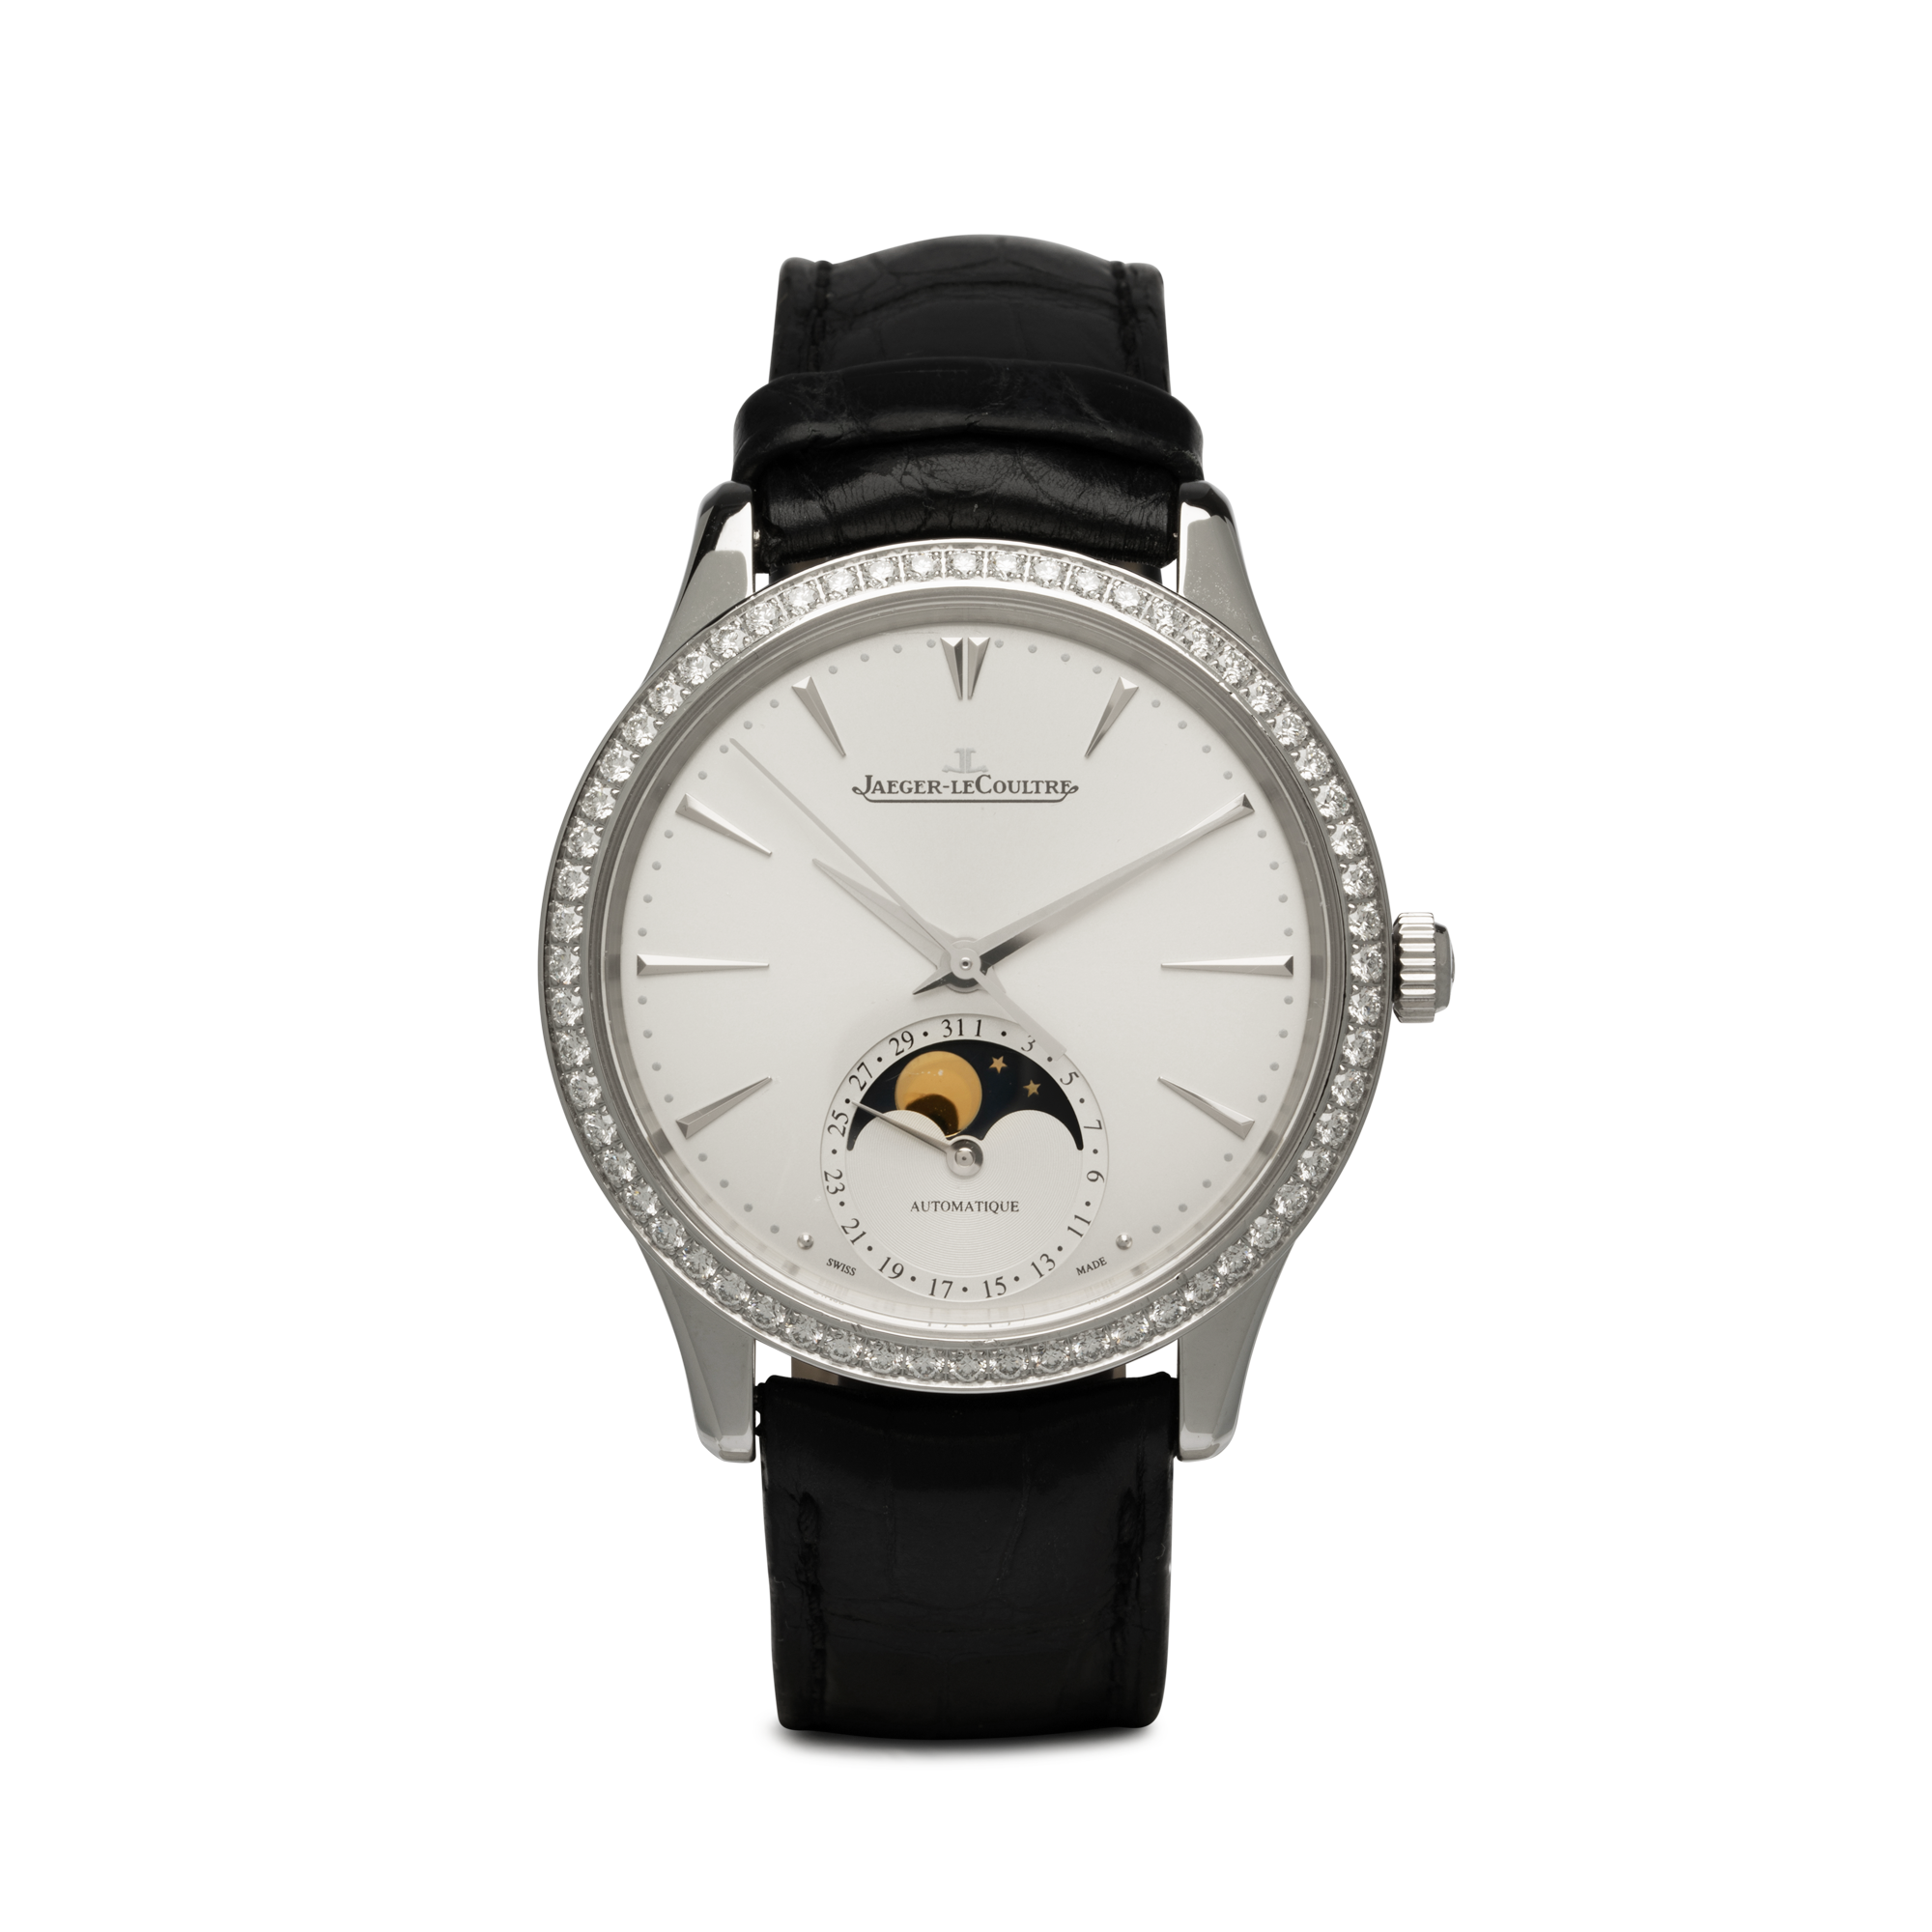 JAEGER-LECOULTRE MASTER ULTRA THIN MOON-exchage-image